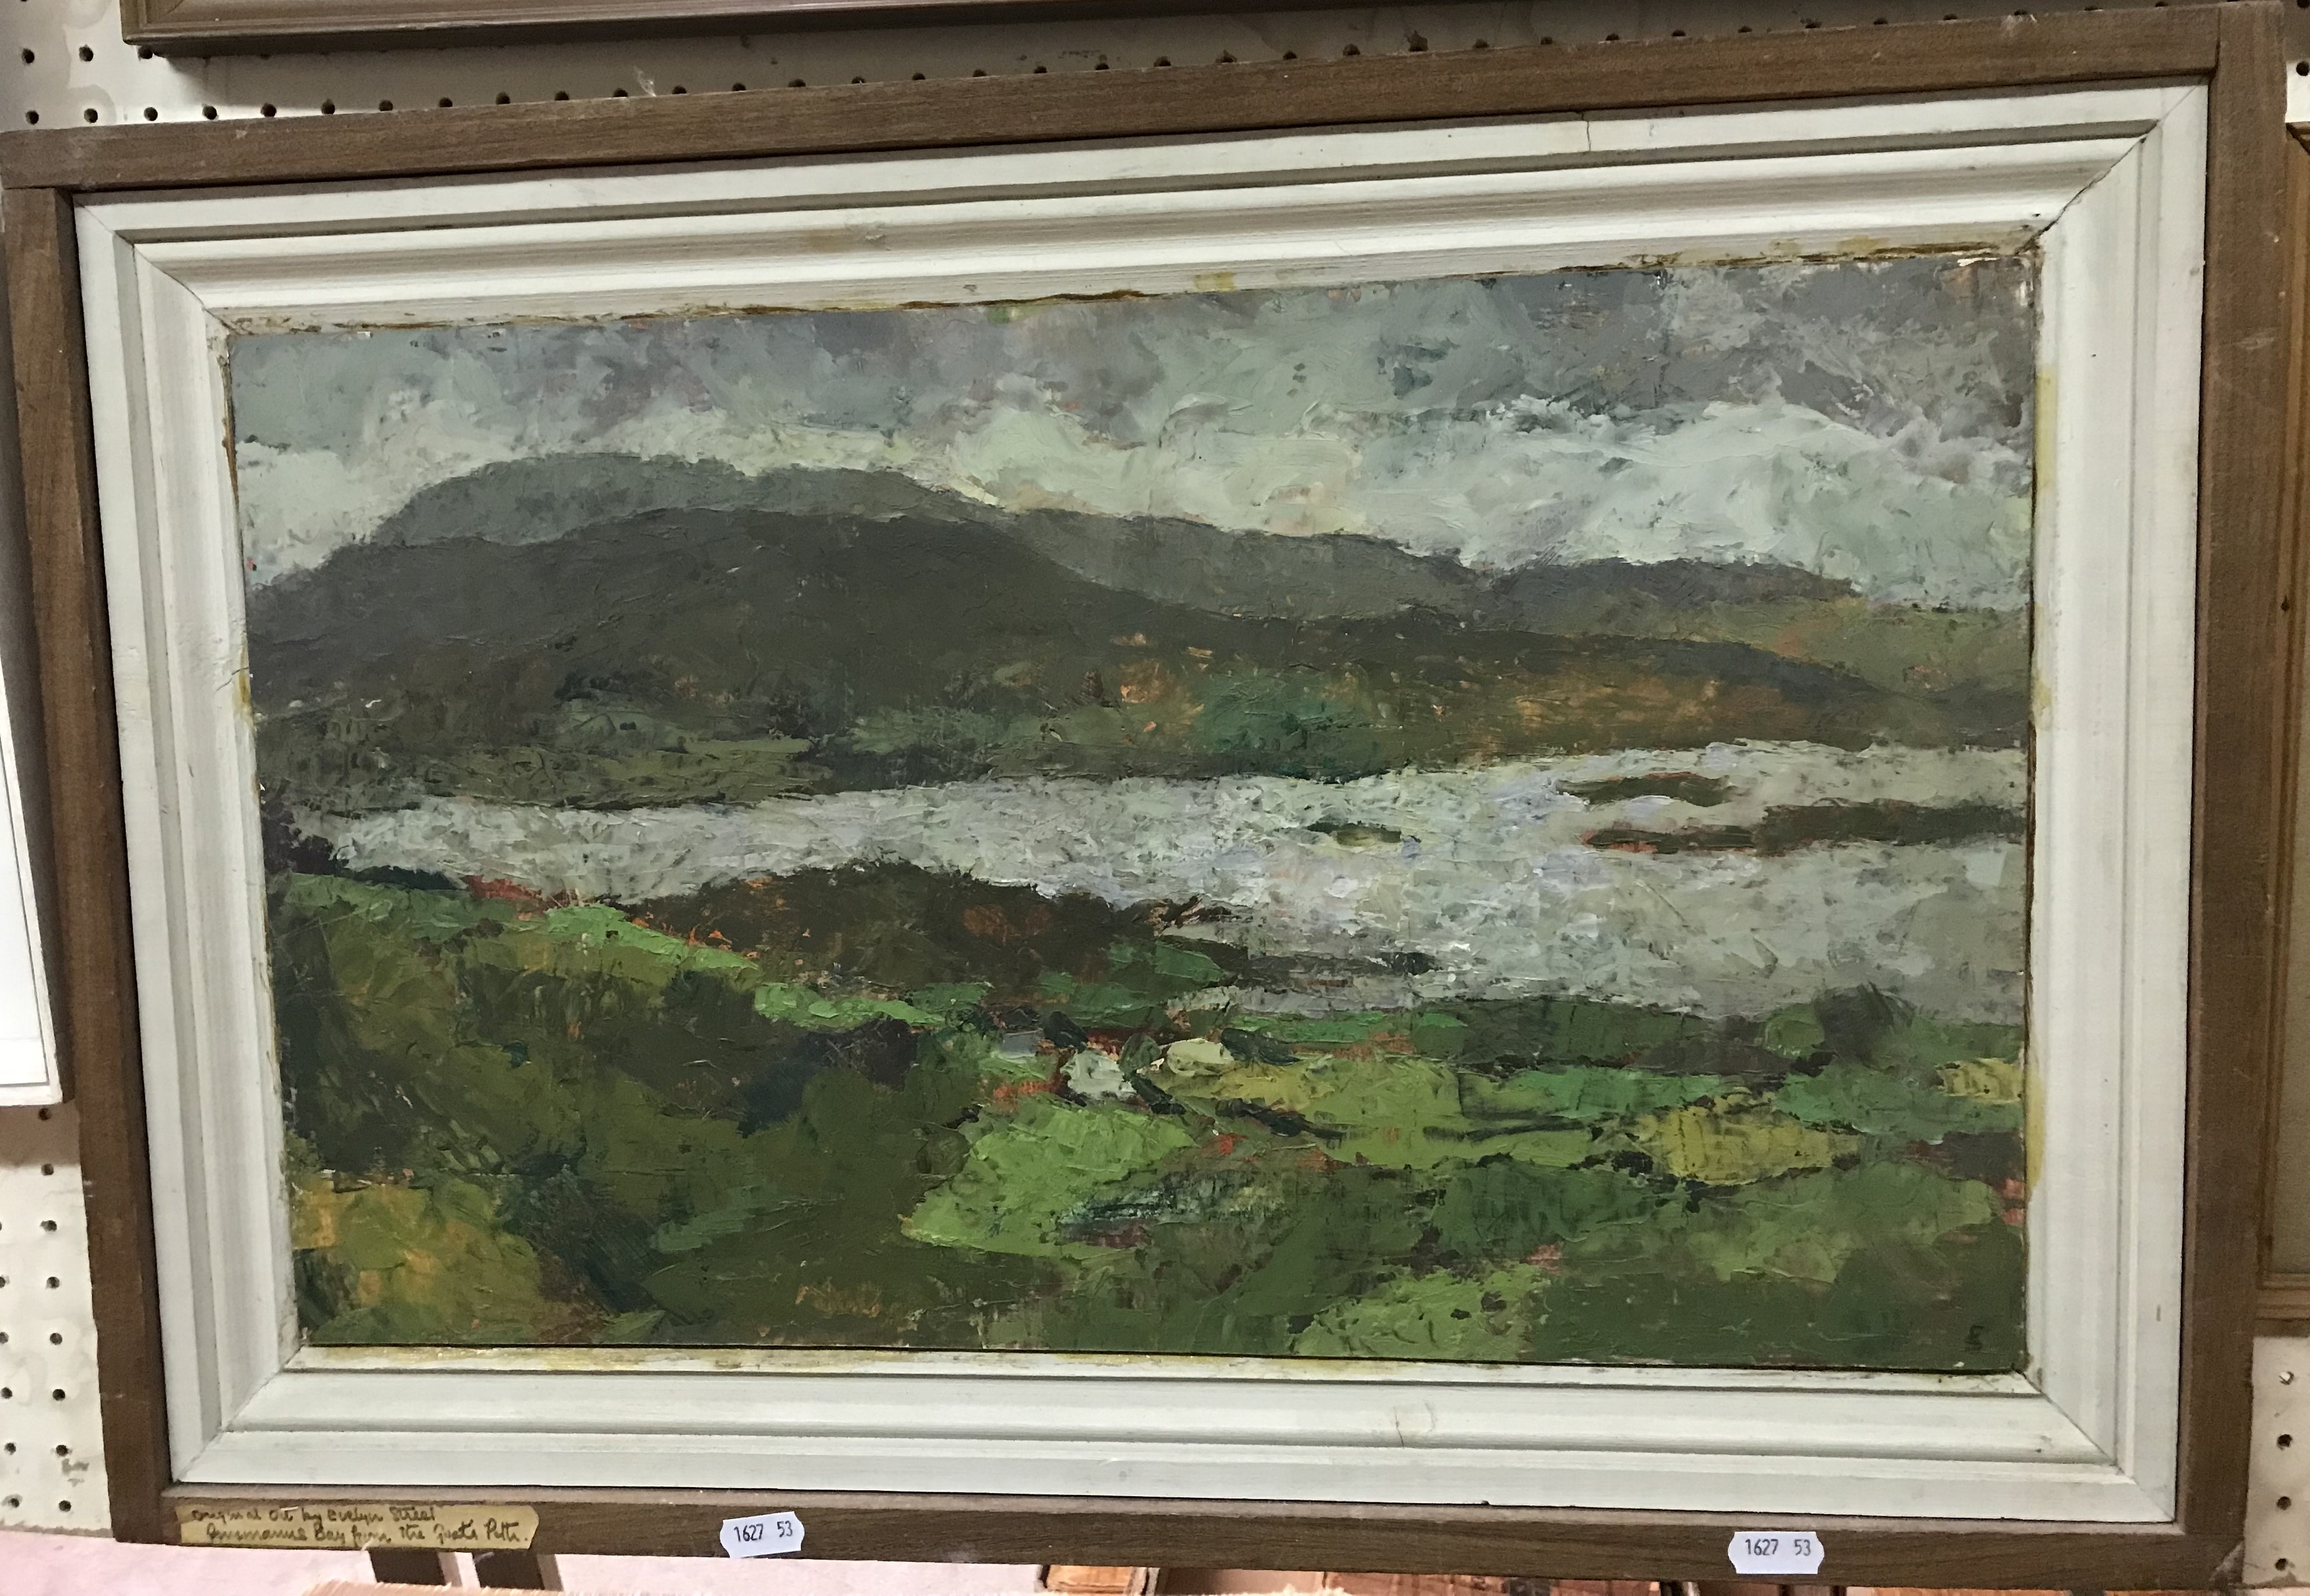 EVELYN STREET “Dunmanus Bay from the goat's path” with hills rising in background, oil on board, - Image 2 of 3